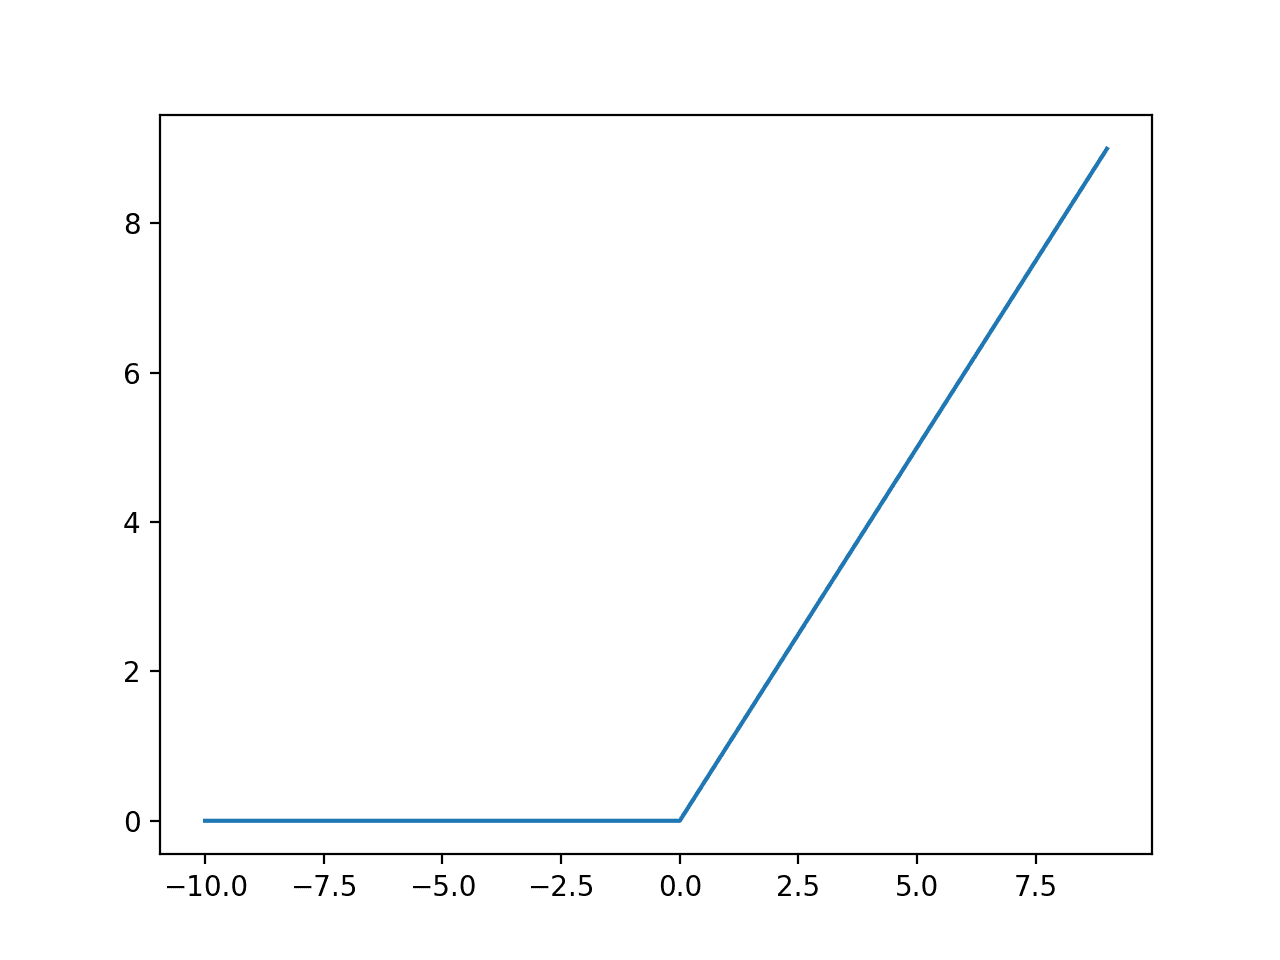 Plot of Inputs vs. Outputs for the ReLU Activation Function.